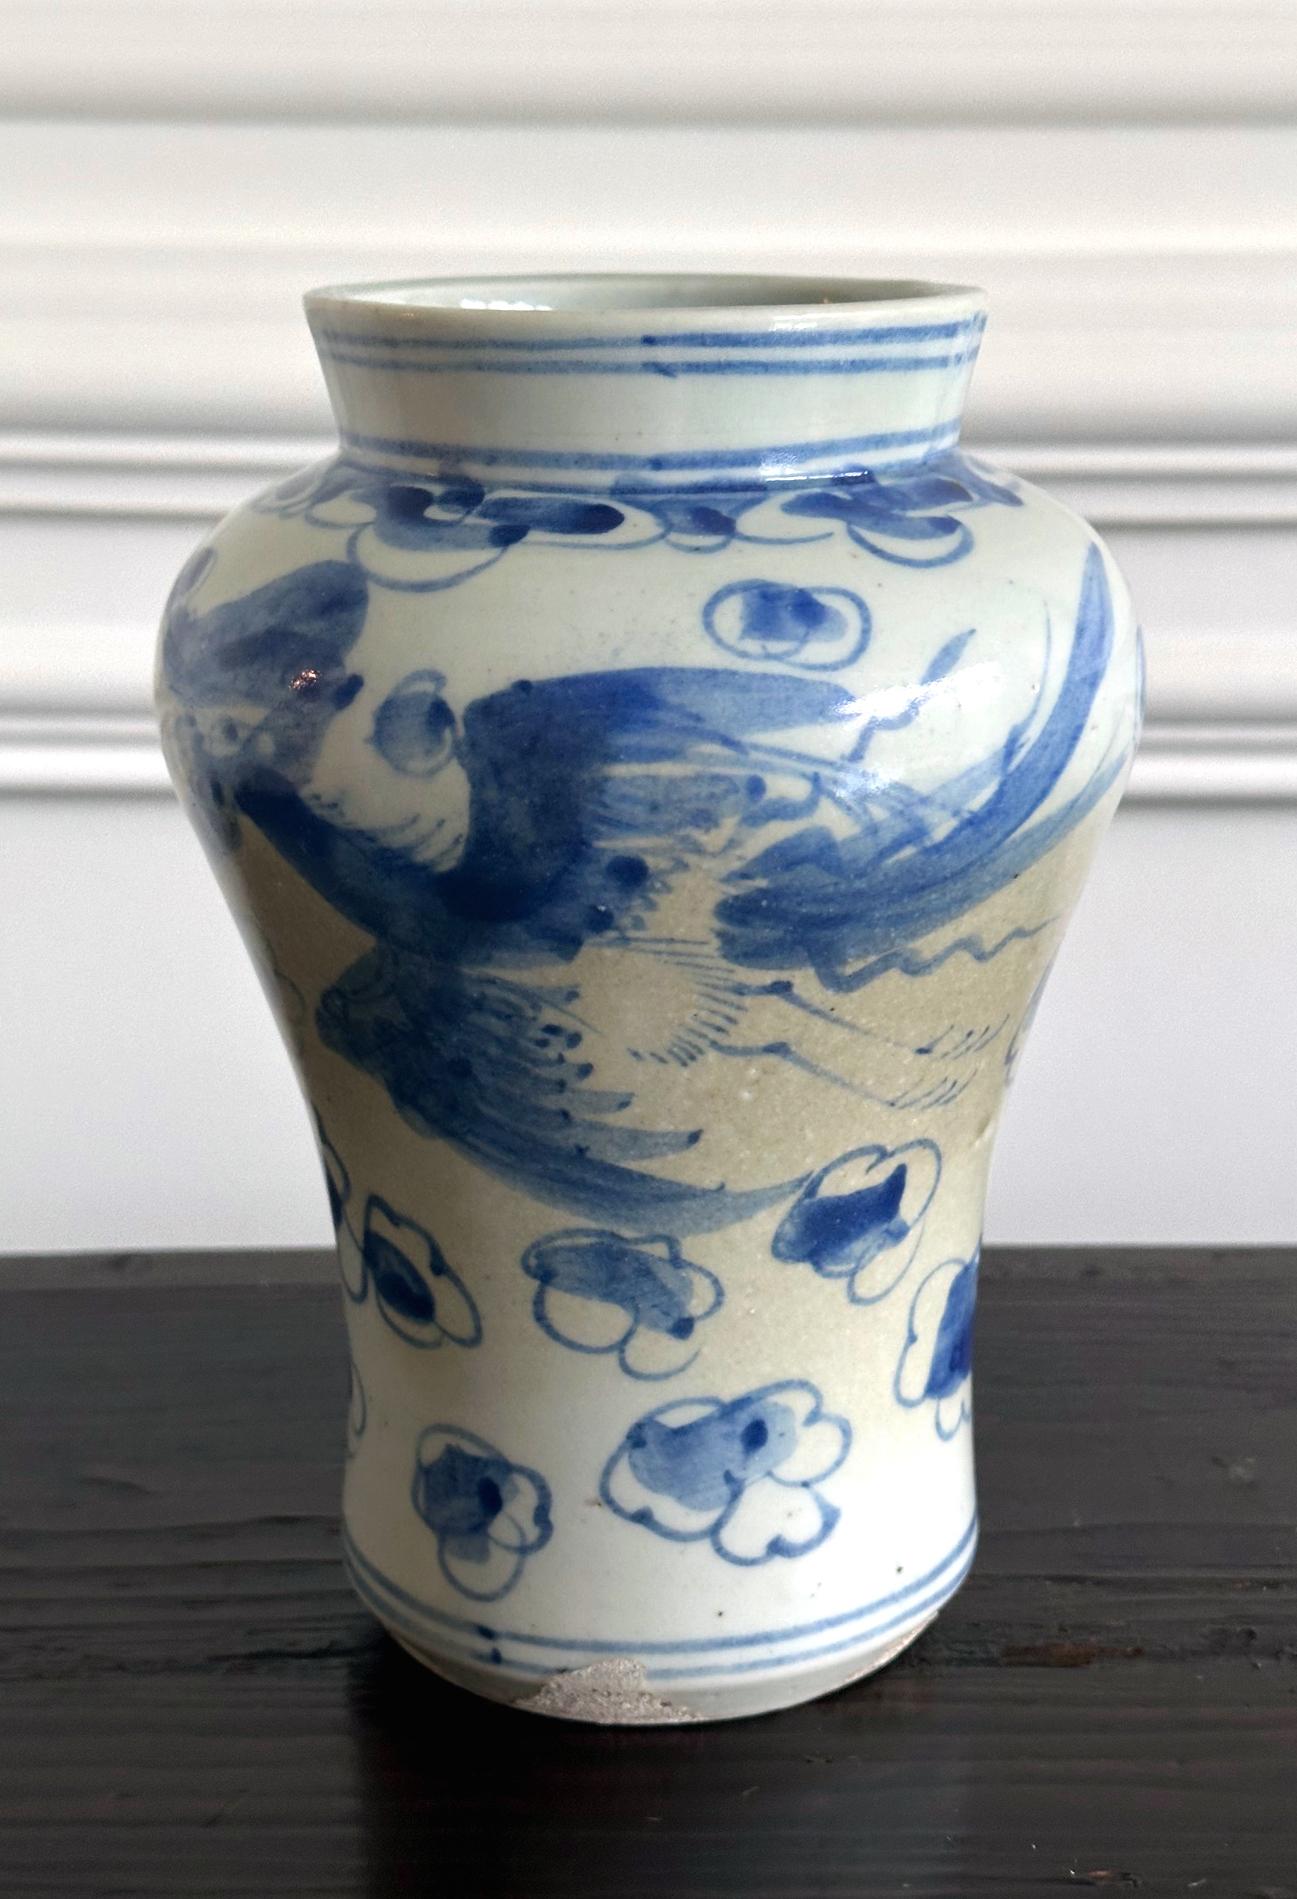 A korean white porcelain jar with underglaze blue paint circa late 19th century toward the end of Joseon Dynasty. Porcelain jars of this elongated form with swell shoulder, wide mouth through a short, everted neck were made in various size in the